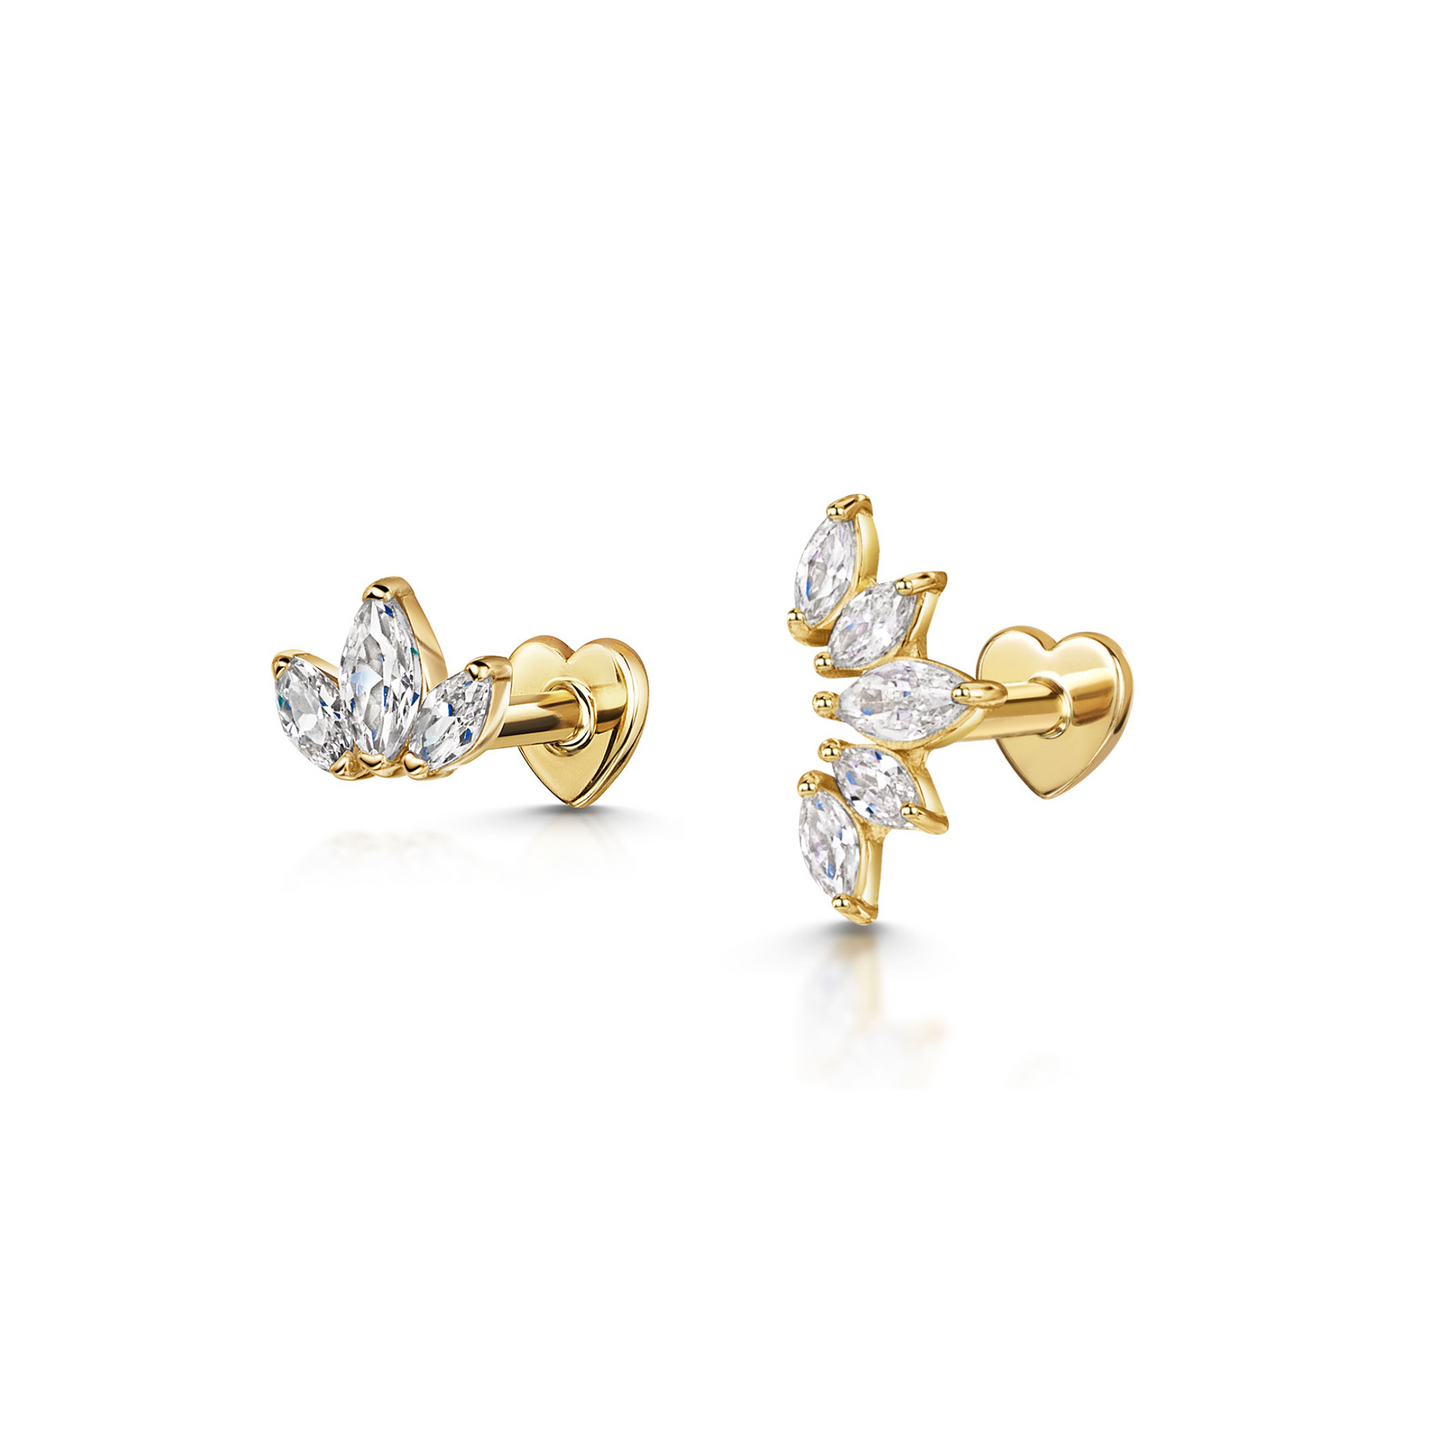 The frosted stacking set - 9k solid yellow gold flat back labret stud earring set